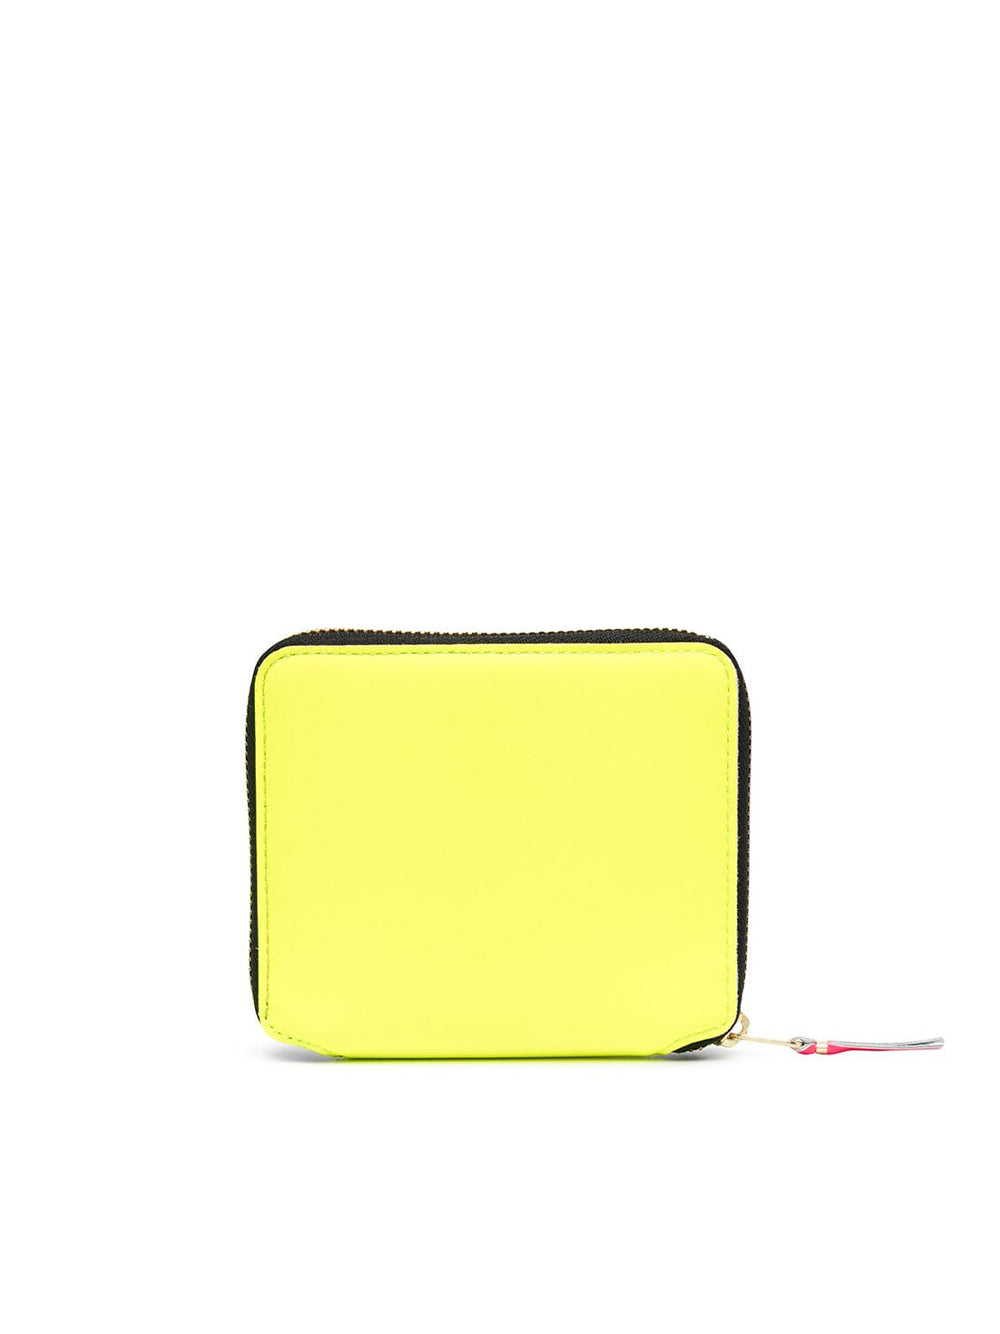 Super Fluo Leather Wallet With Zip